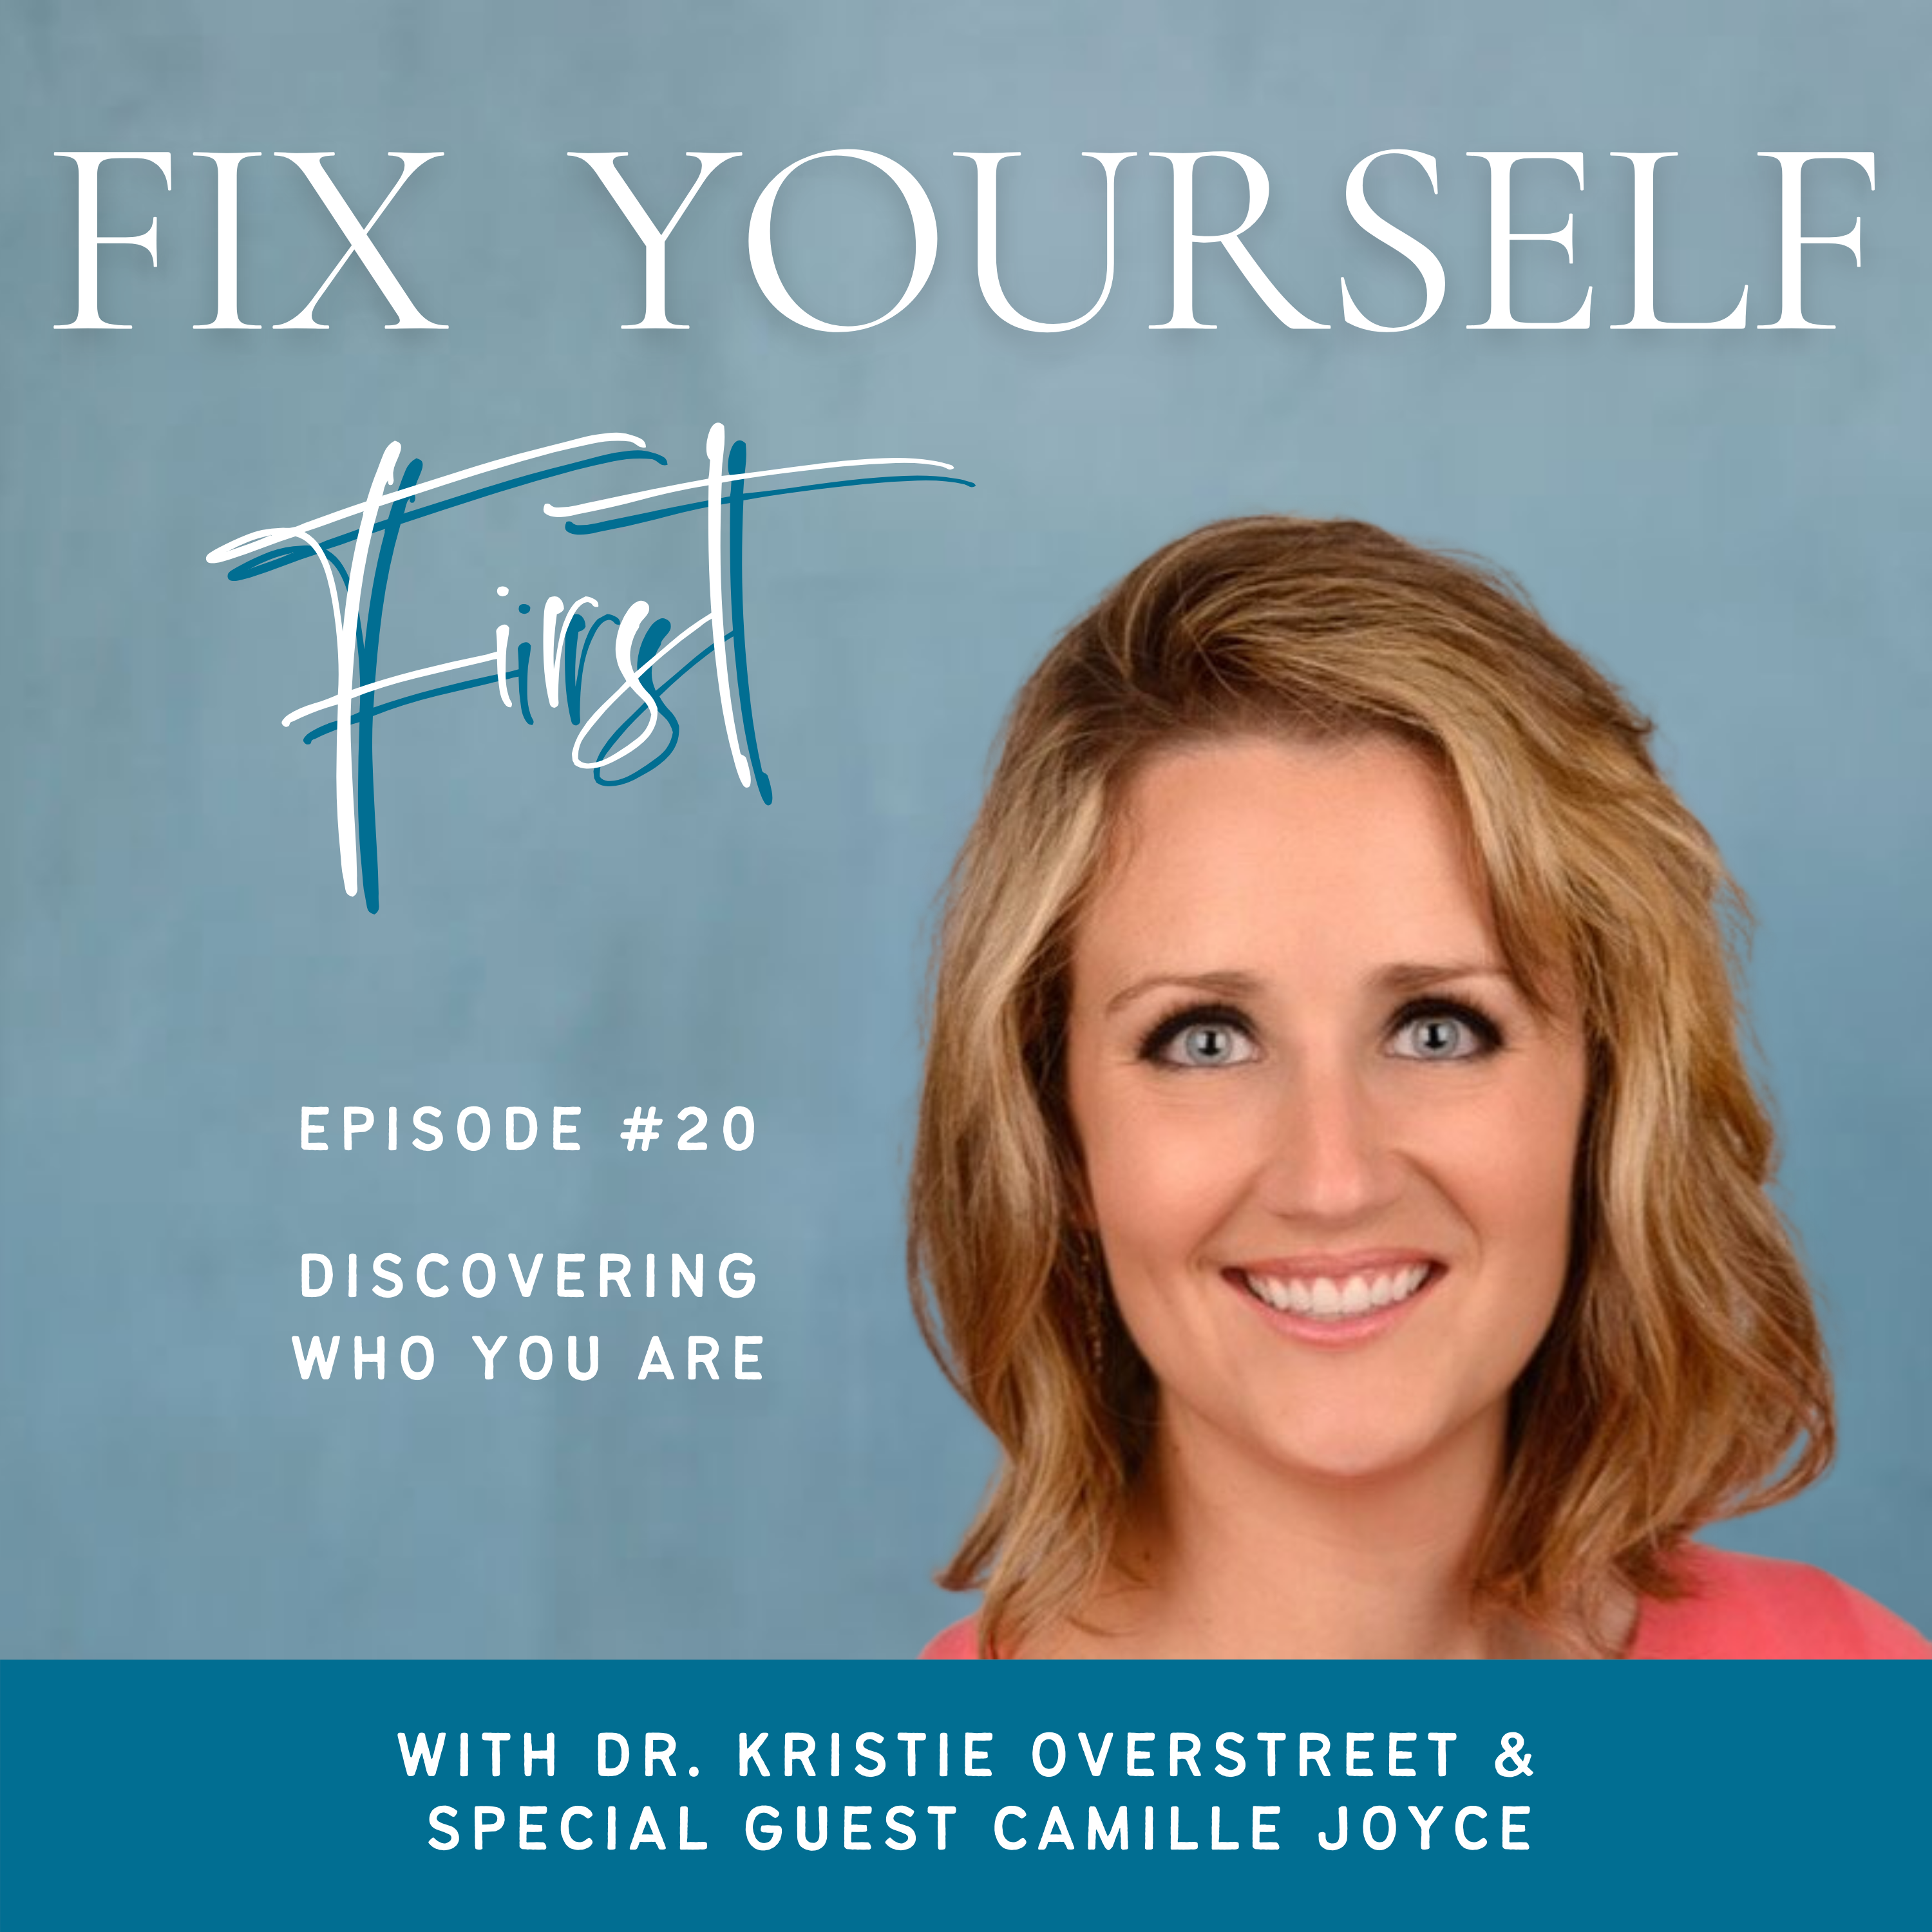 Fix Yourself First - Episode 20